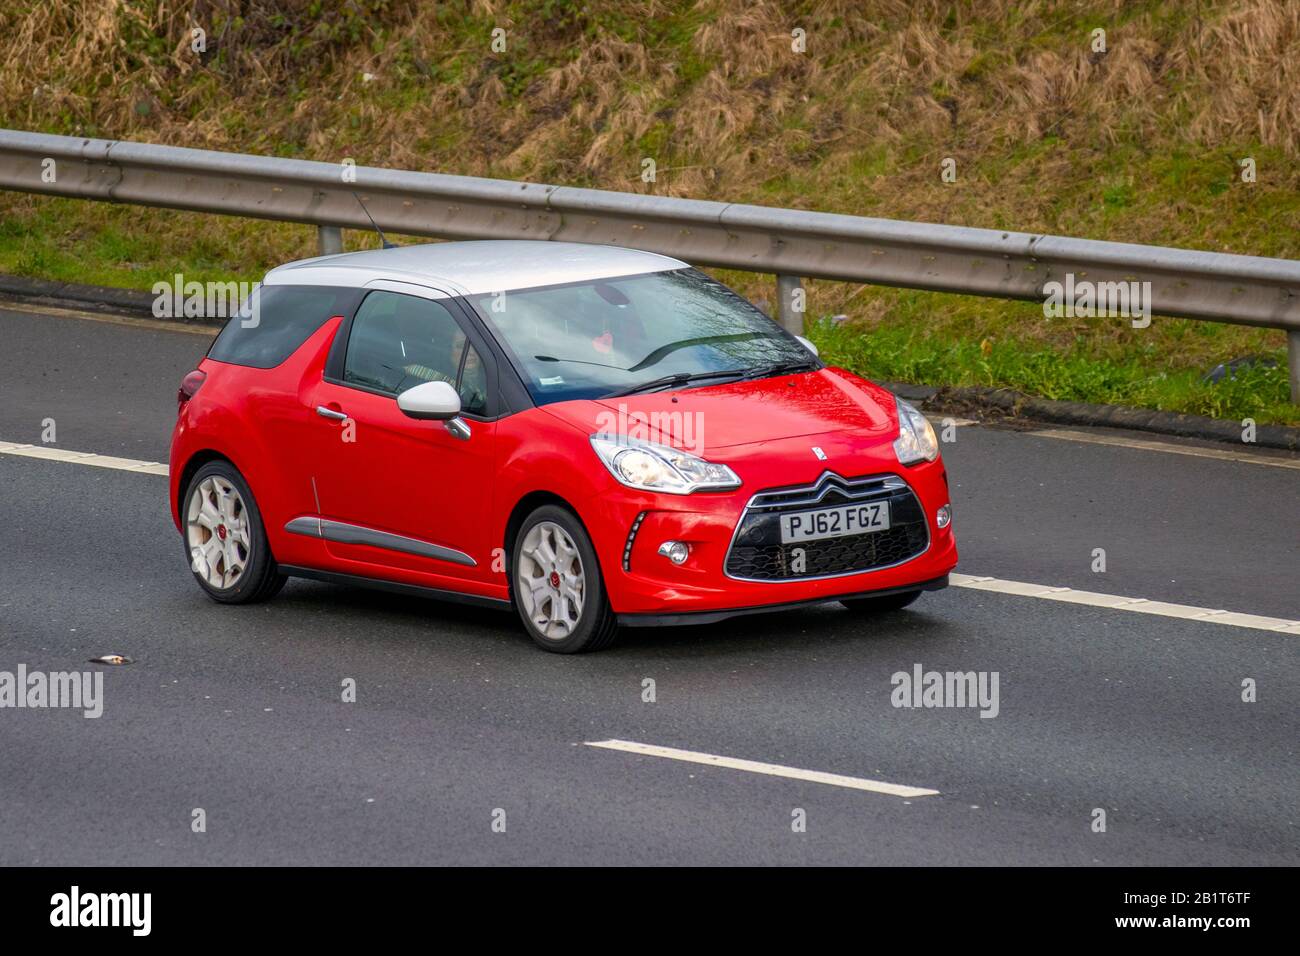 2012 Red Citroën DS3 Dstyle UK Vehicular traffic, transport, modern vehicles, cars, vehicles, vehicle, uk roads, french motors, motoring on the M6 motorway highway - Alamy